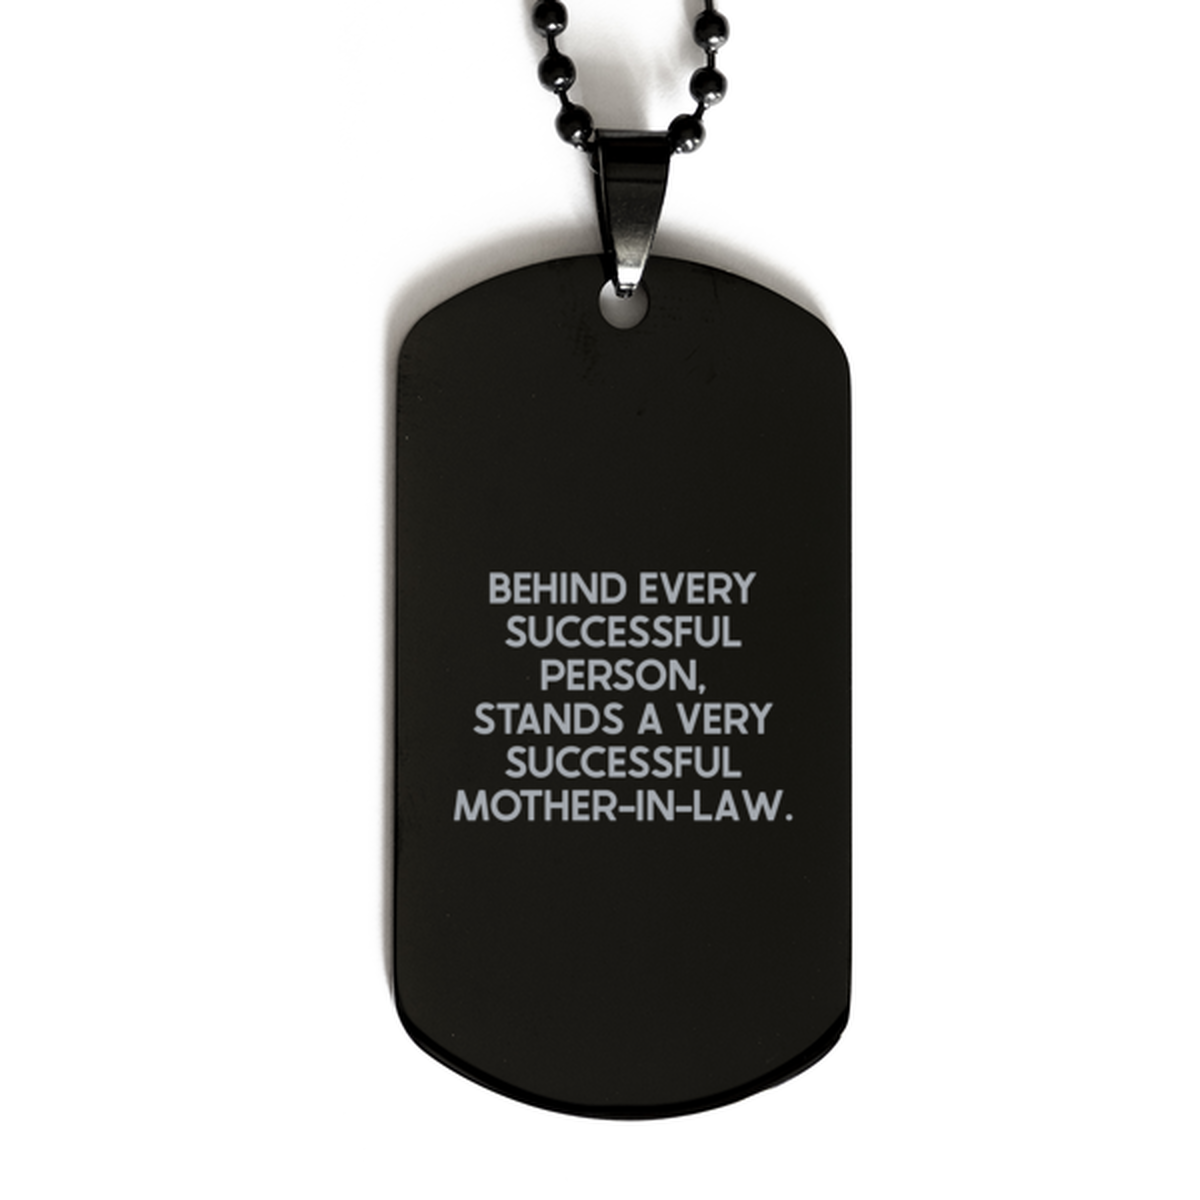 To My Mother-In-Law Black Dog Tag, Successful Person, Mothers Day Gifts For Mother-In-Law From Son-In-Law, Birthday Gifts For Women